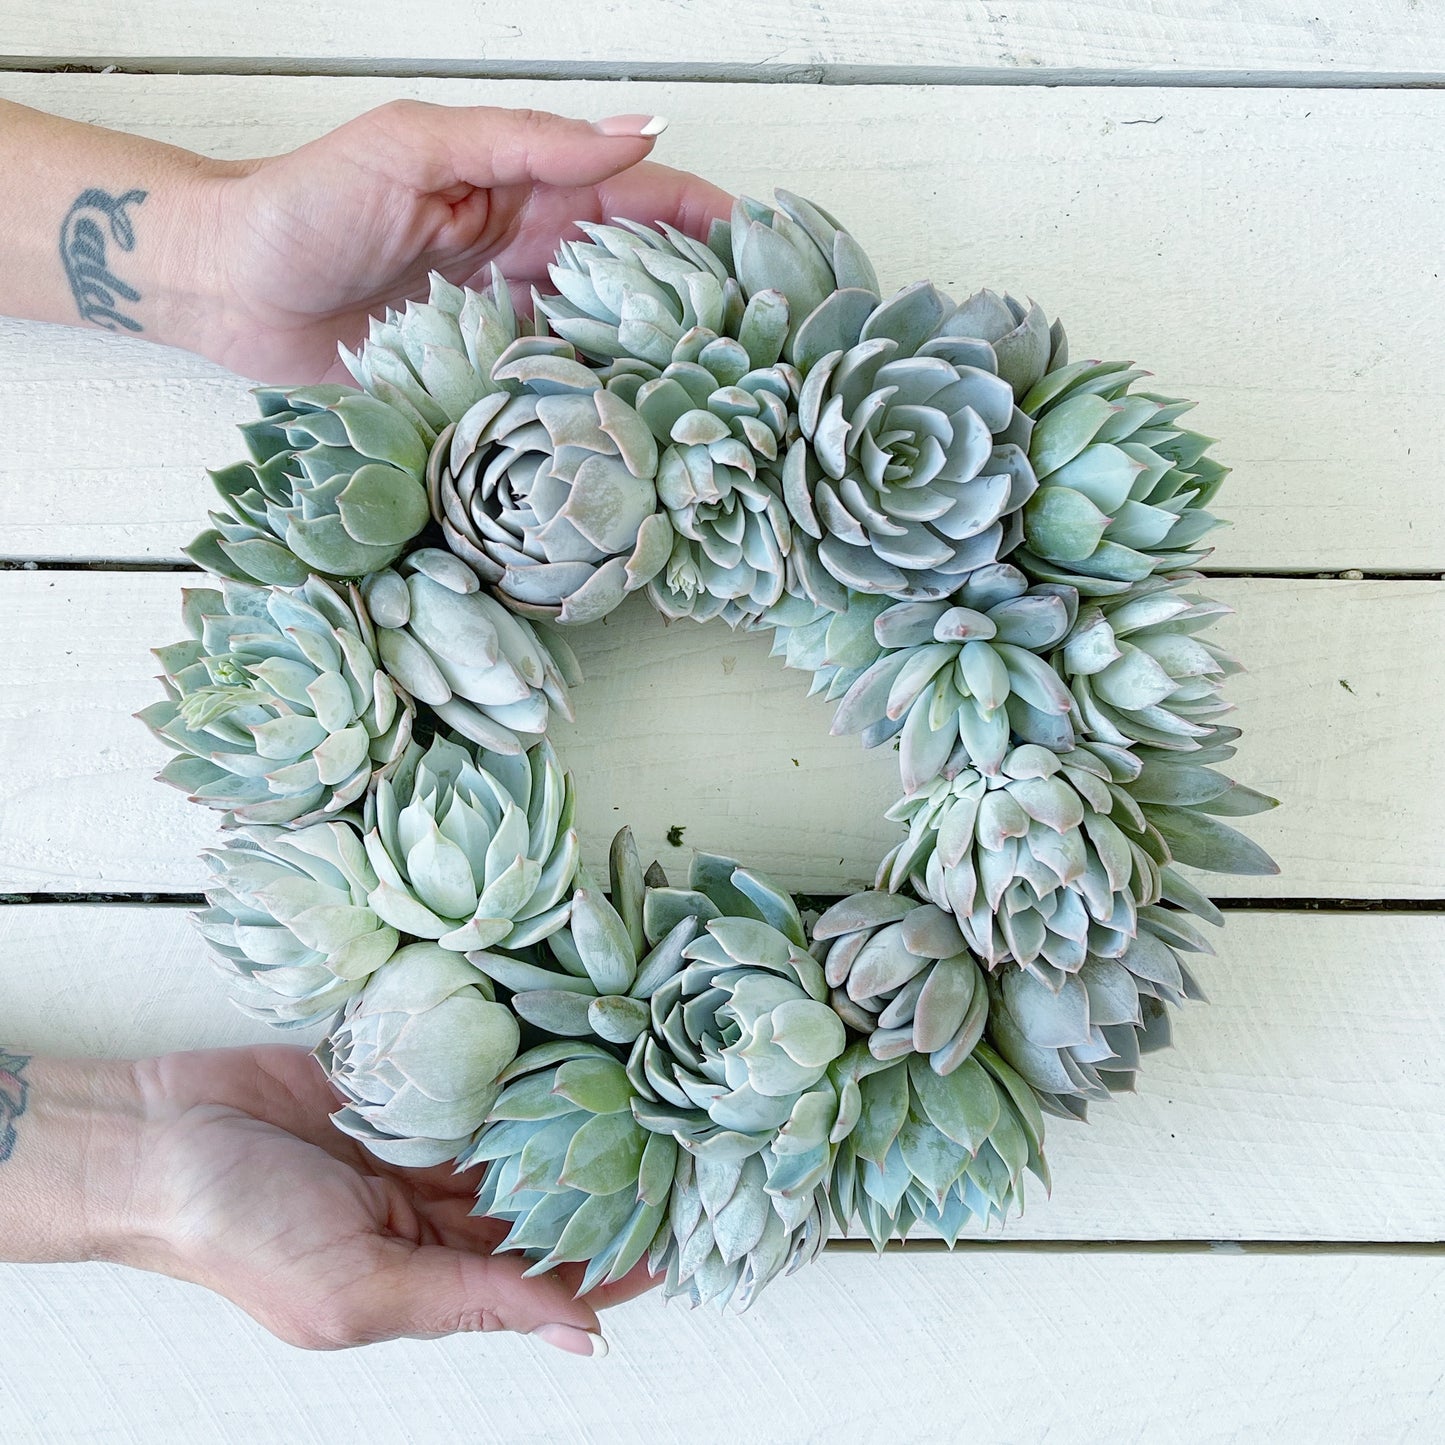 Beach Cottage Wreath in Shades of Blue Succulent Wreath